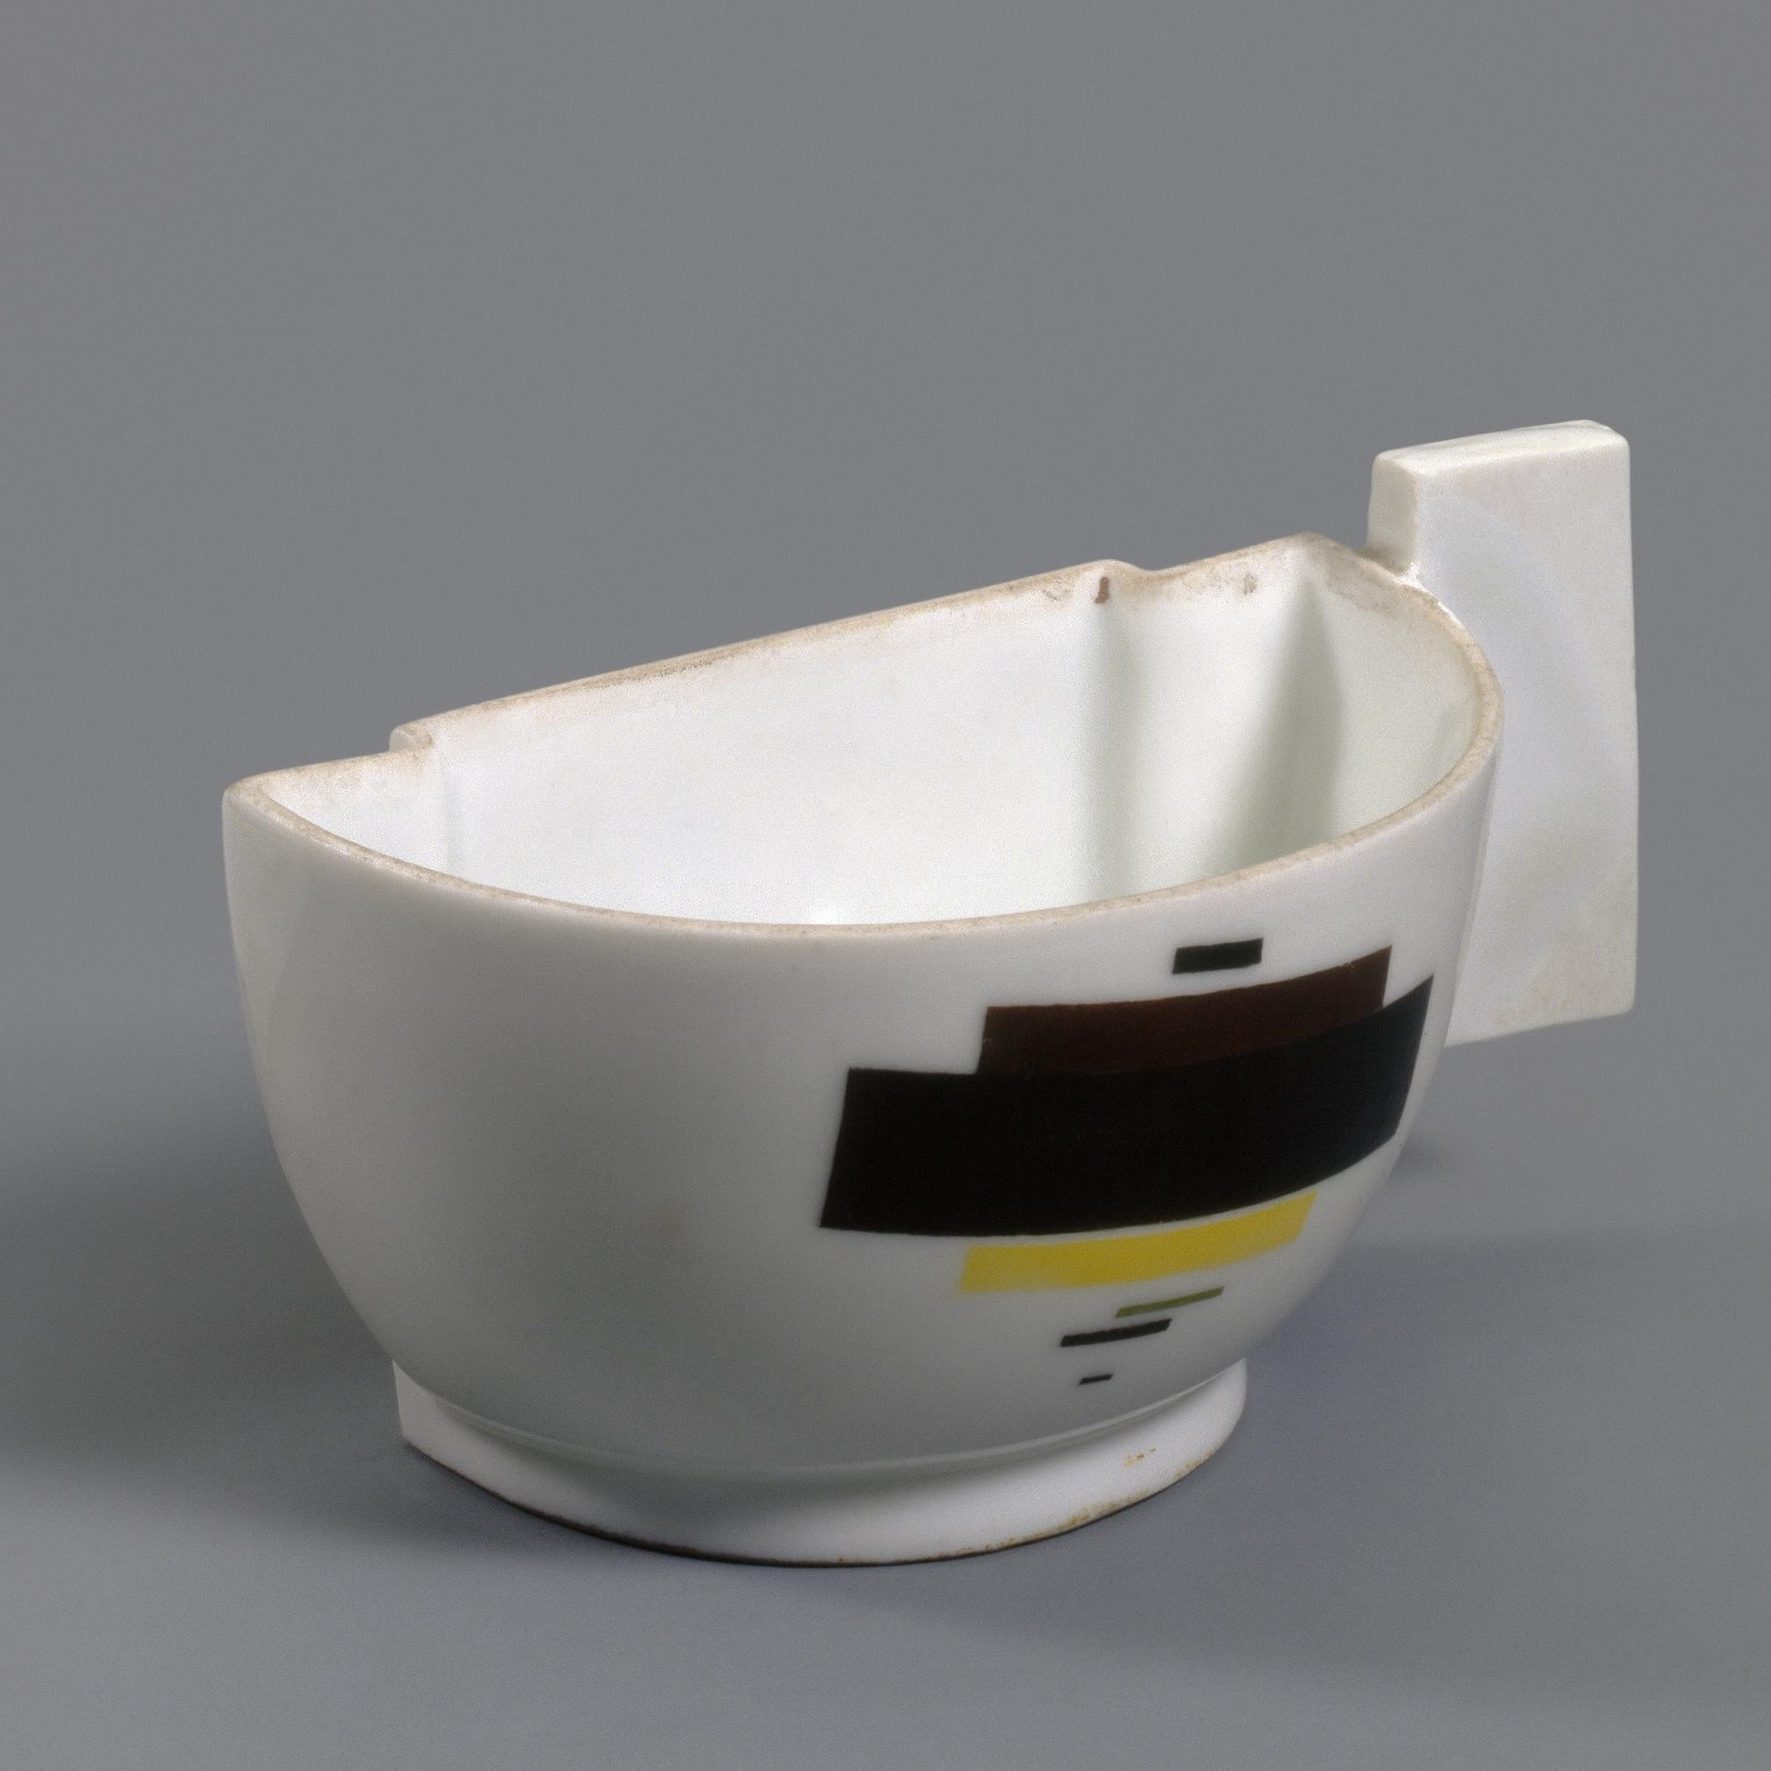 Soviet porcelain suprematism half cup by Malevich and Suetin. 1923. State Porcelain Factory, St Petersburg